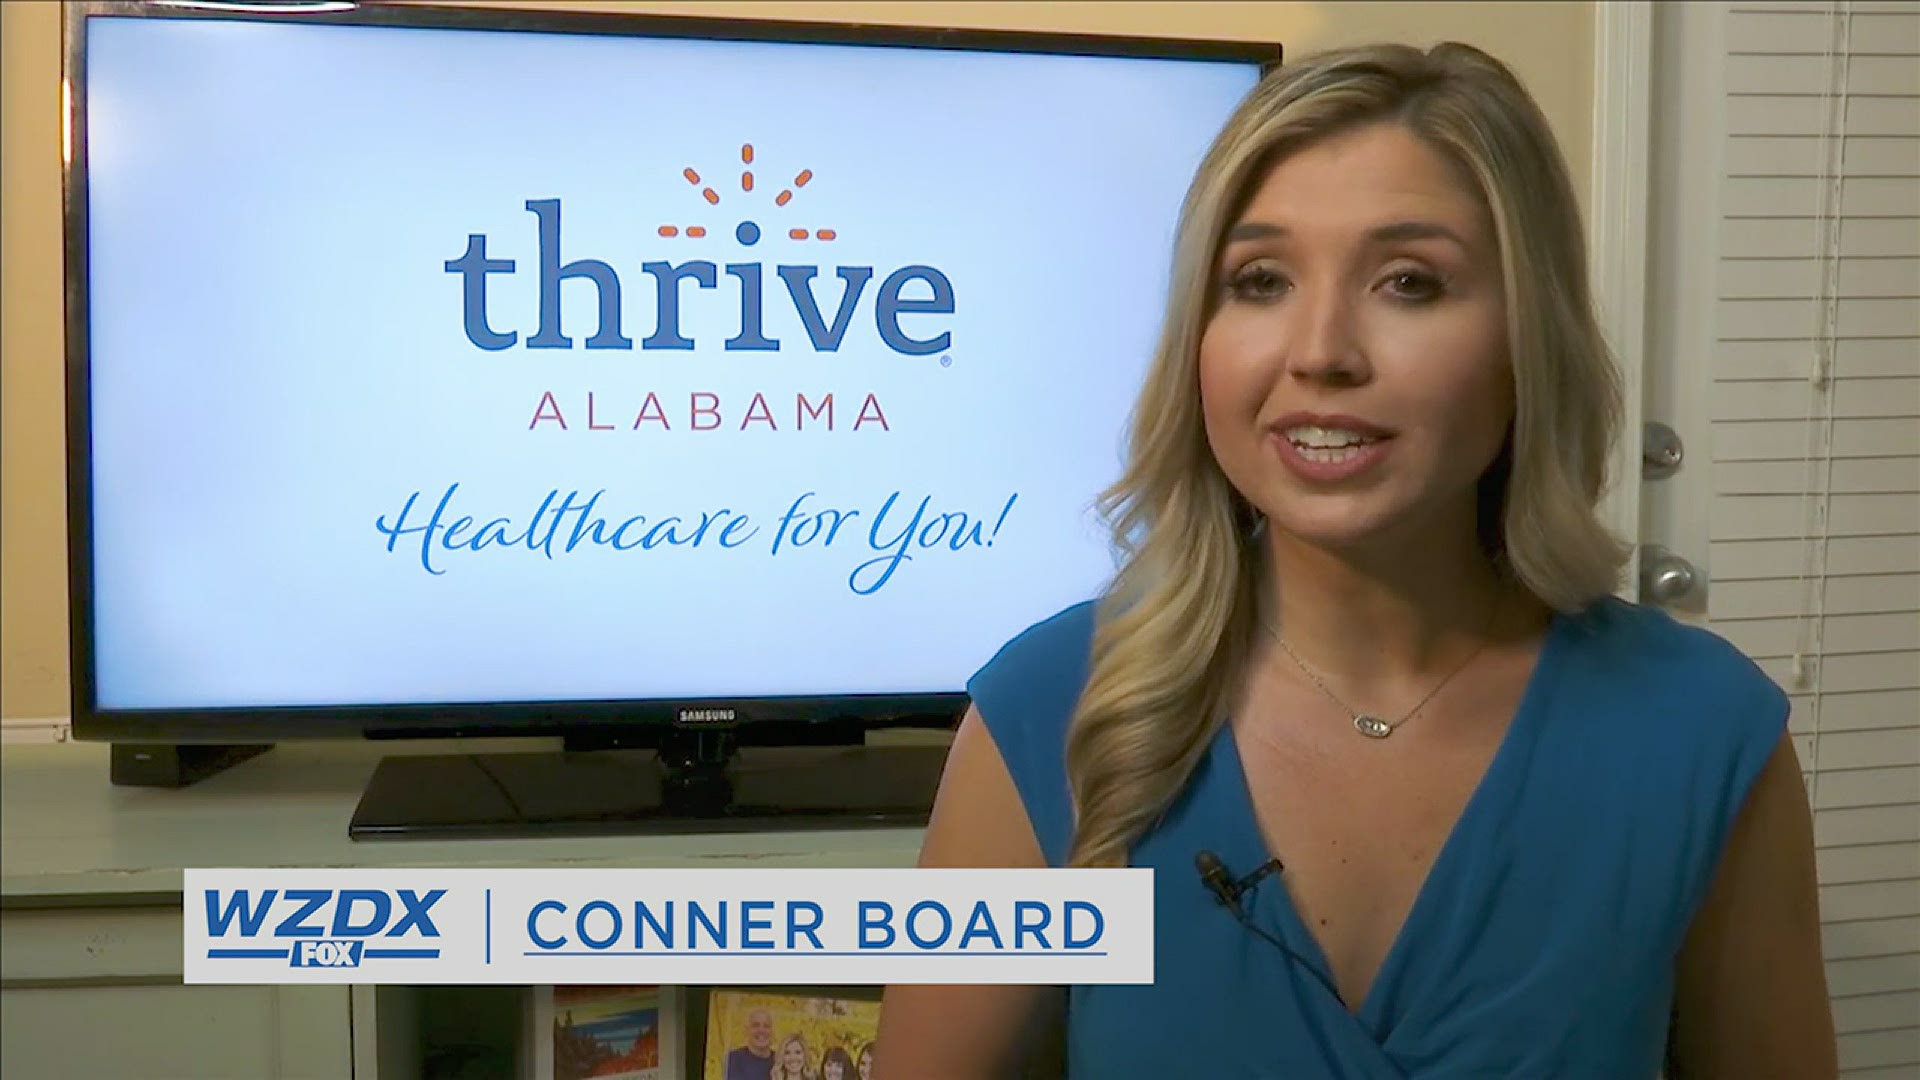 Free COVID-19 testing, no physician referral required, at Thrive Alabama.